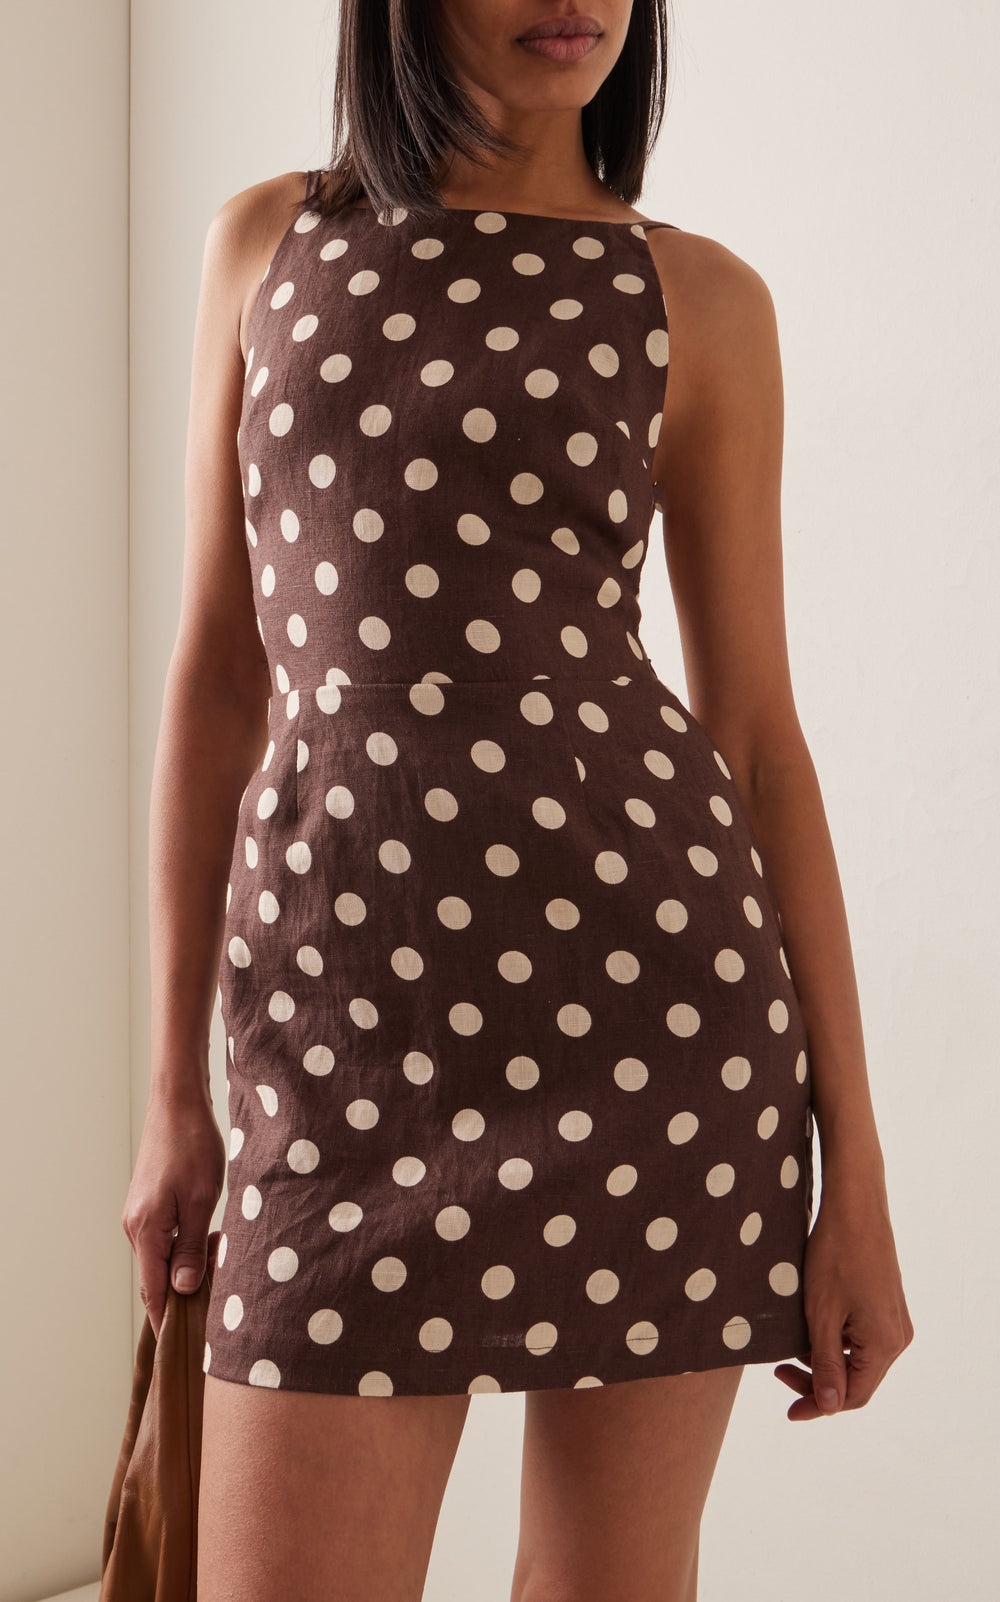 brown polkadot comfortable dress for traveling to europe